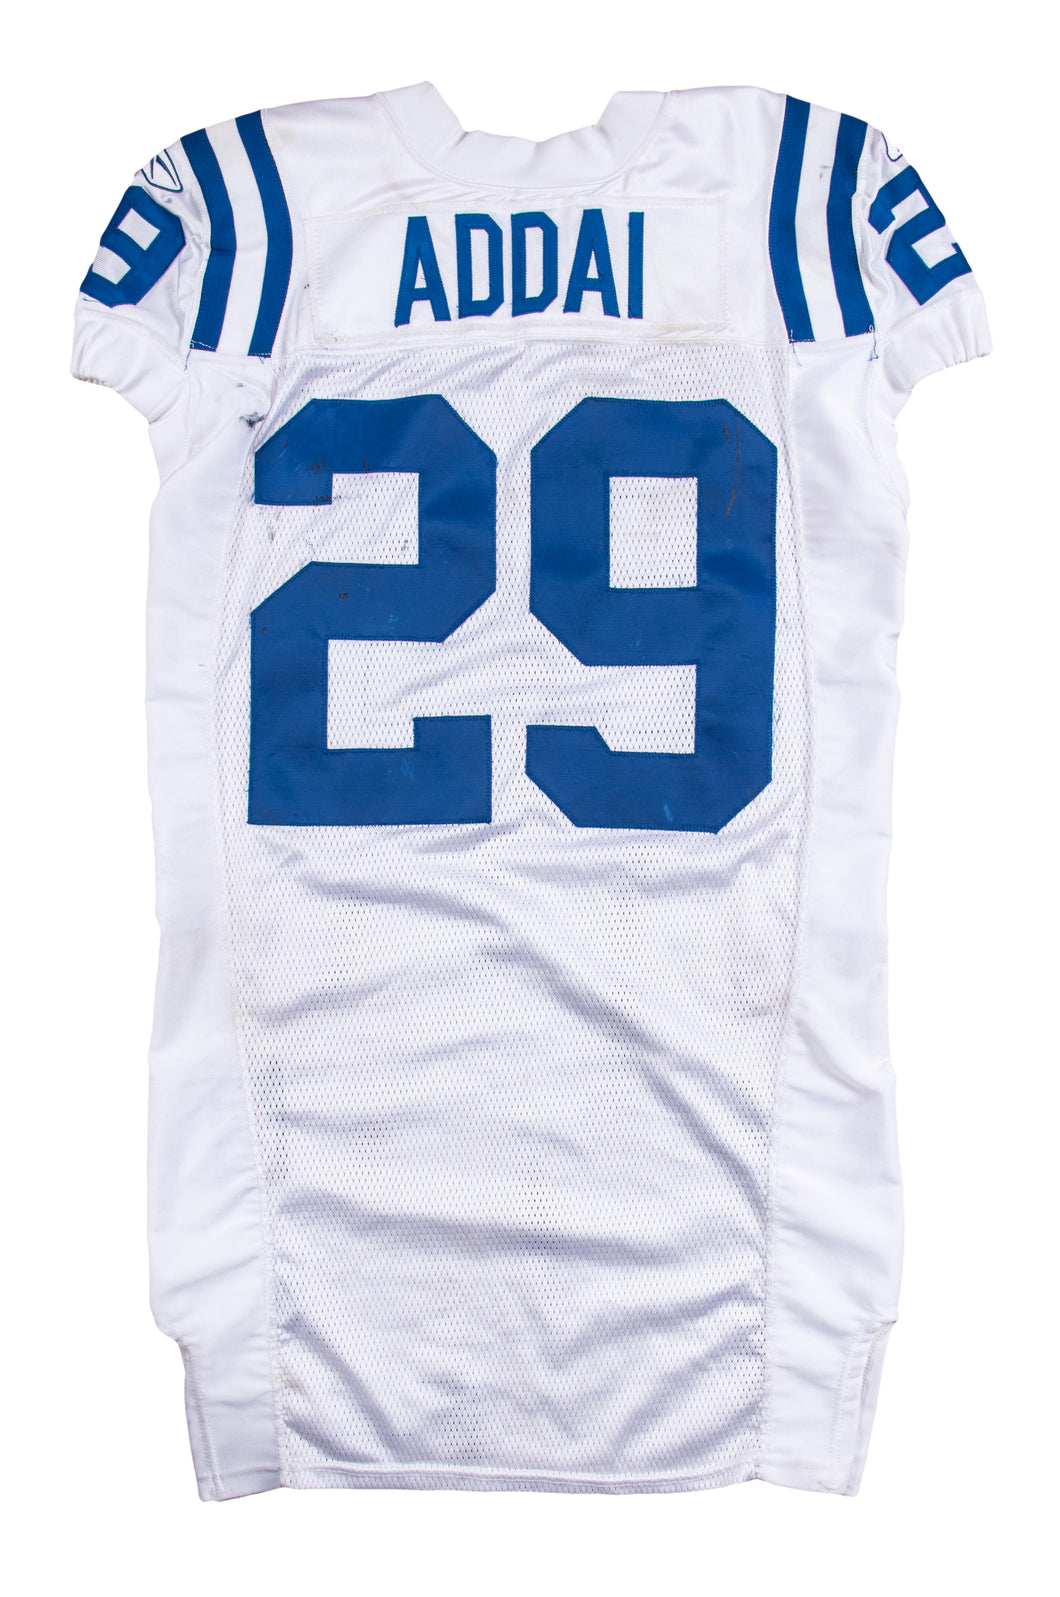 2007 Joseph Addai Game Used Indianapolis Colts Road Jersey Photo Matched To 11/22/2007